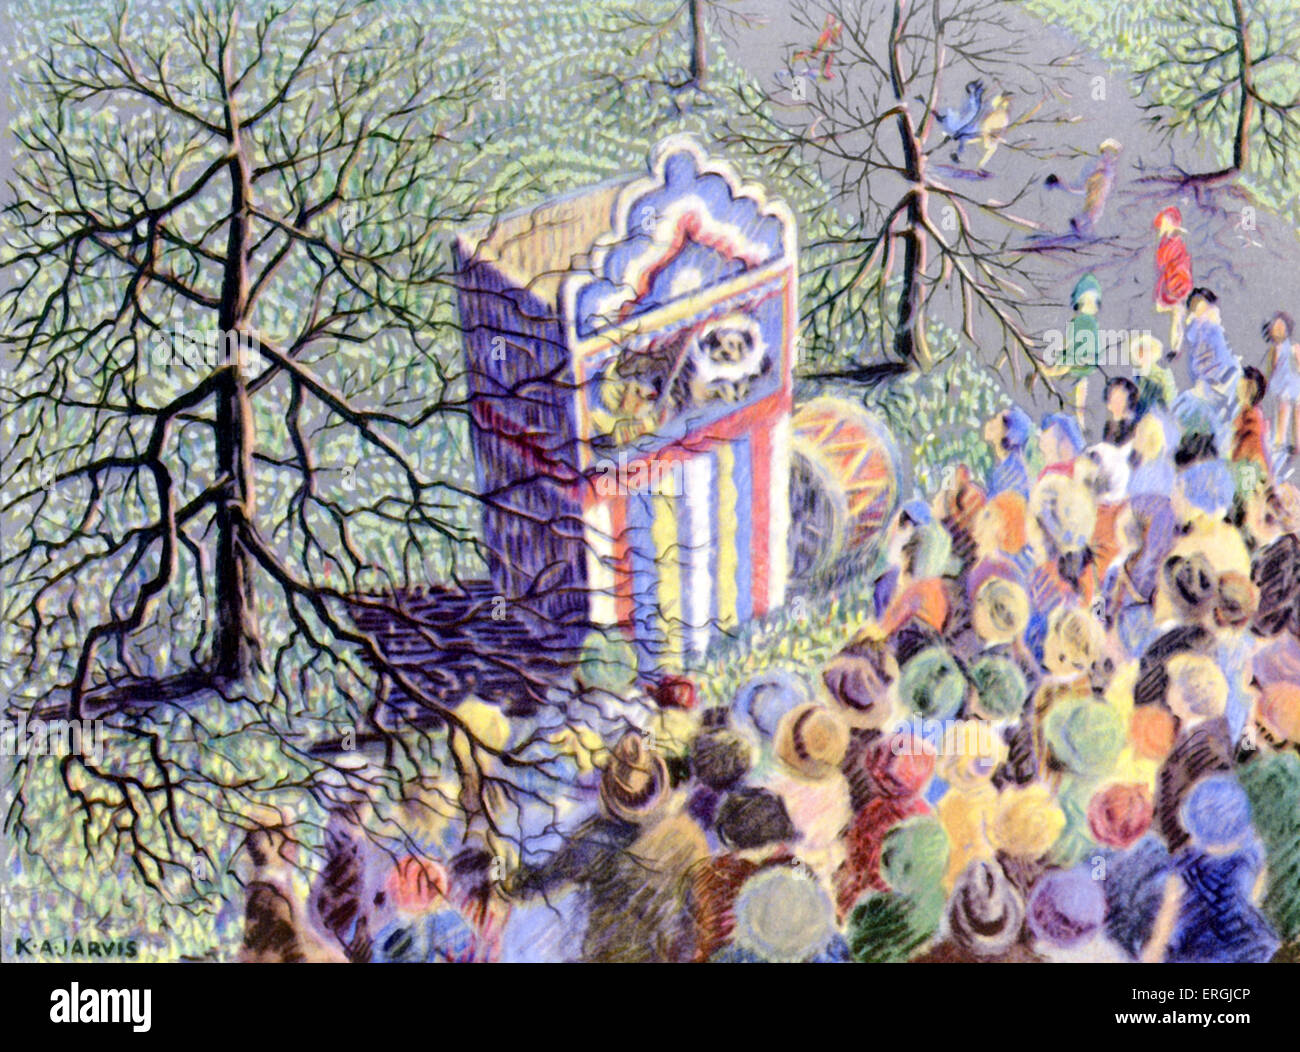 Punch & Judy Show. Illustration by K.A. Jarvis (dates unknown), 1930. Stock Photo